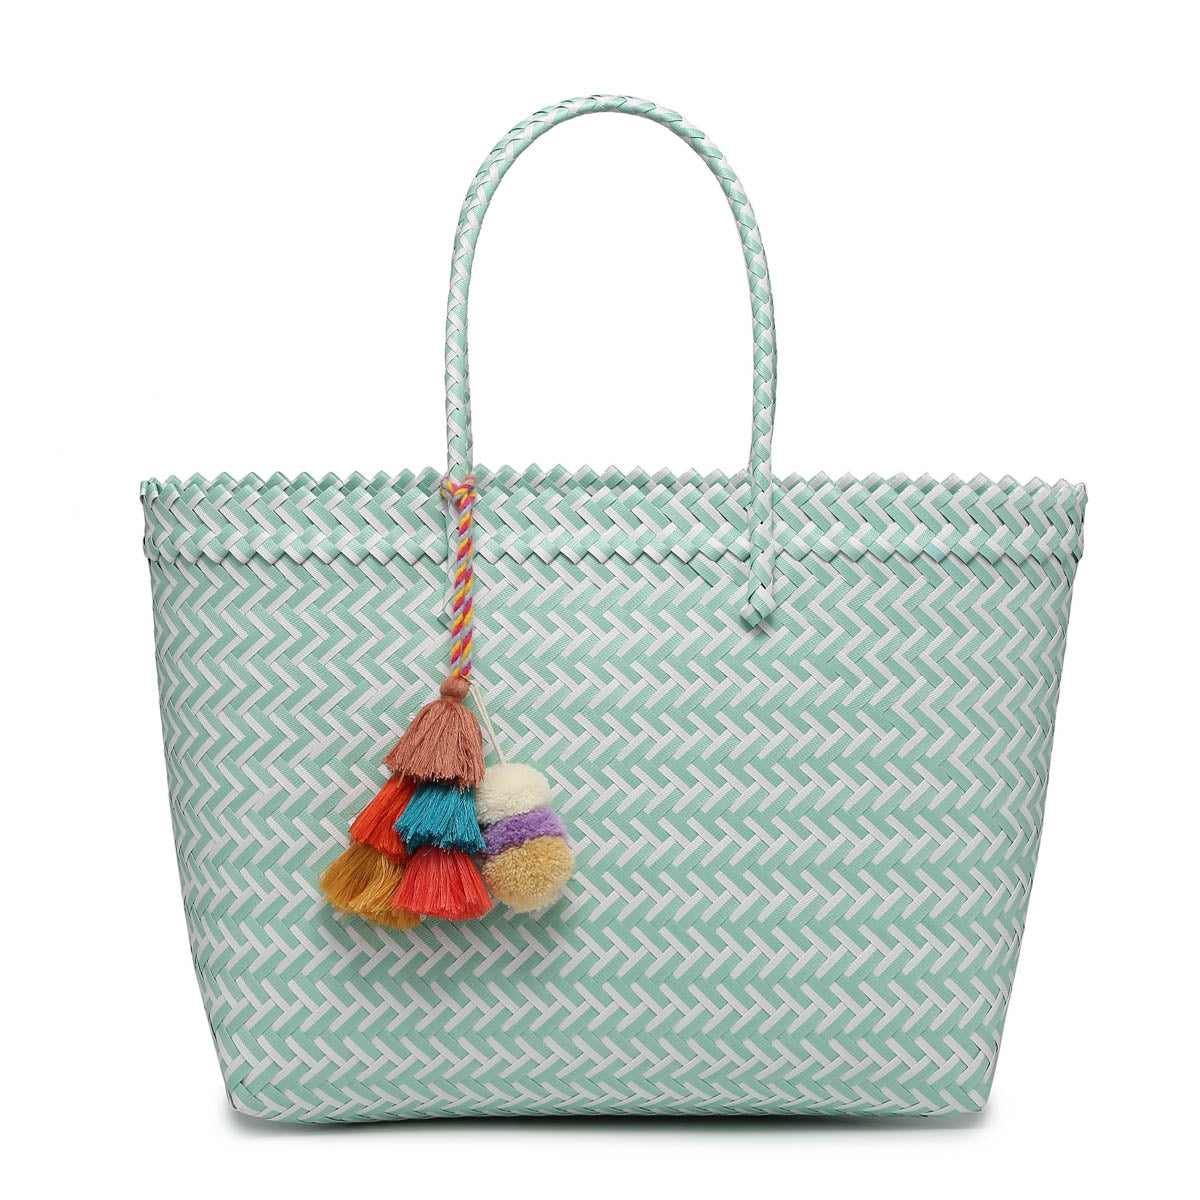 Jen & Co - Shelby Large Handwoven Tote with Pom-Poms